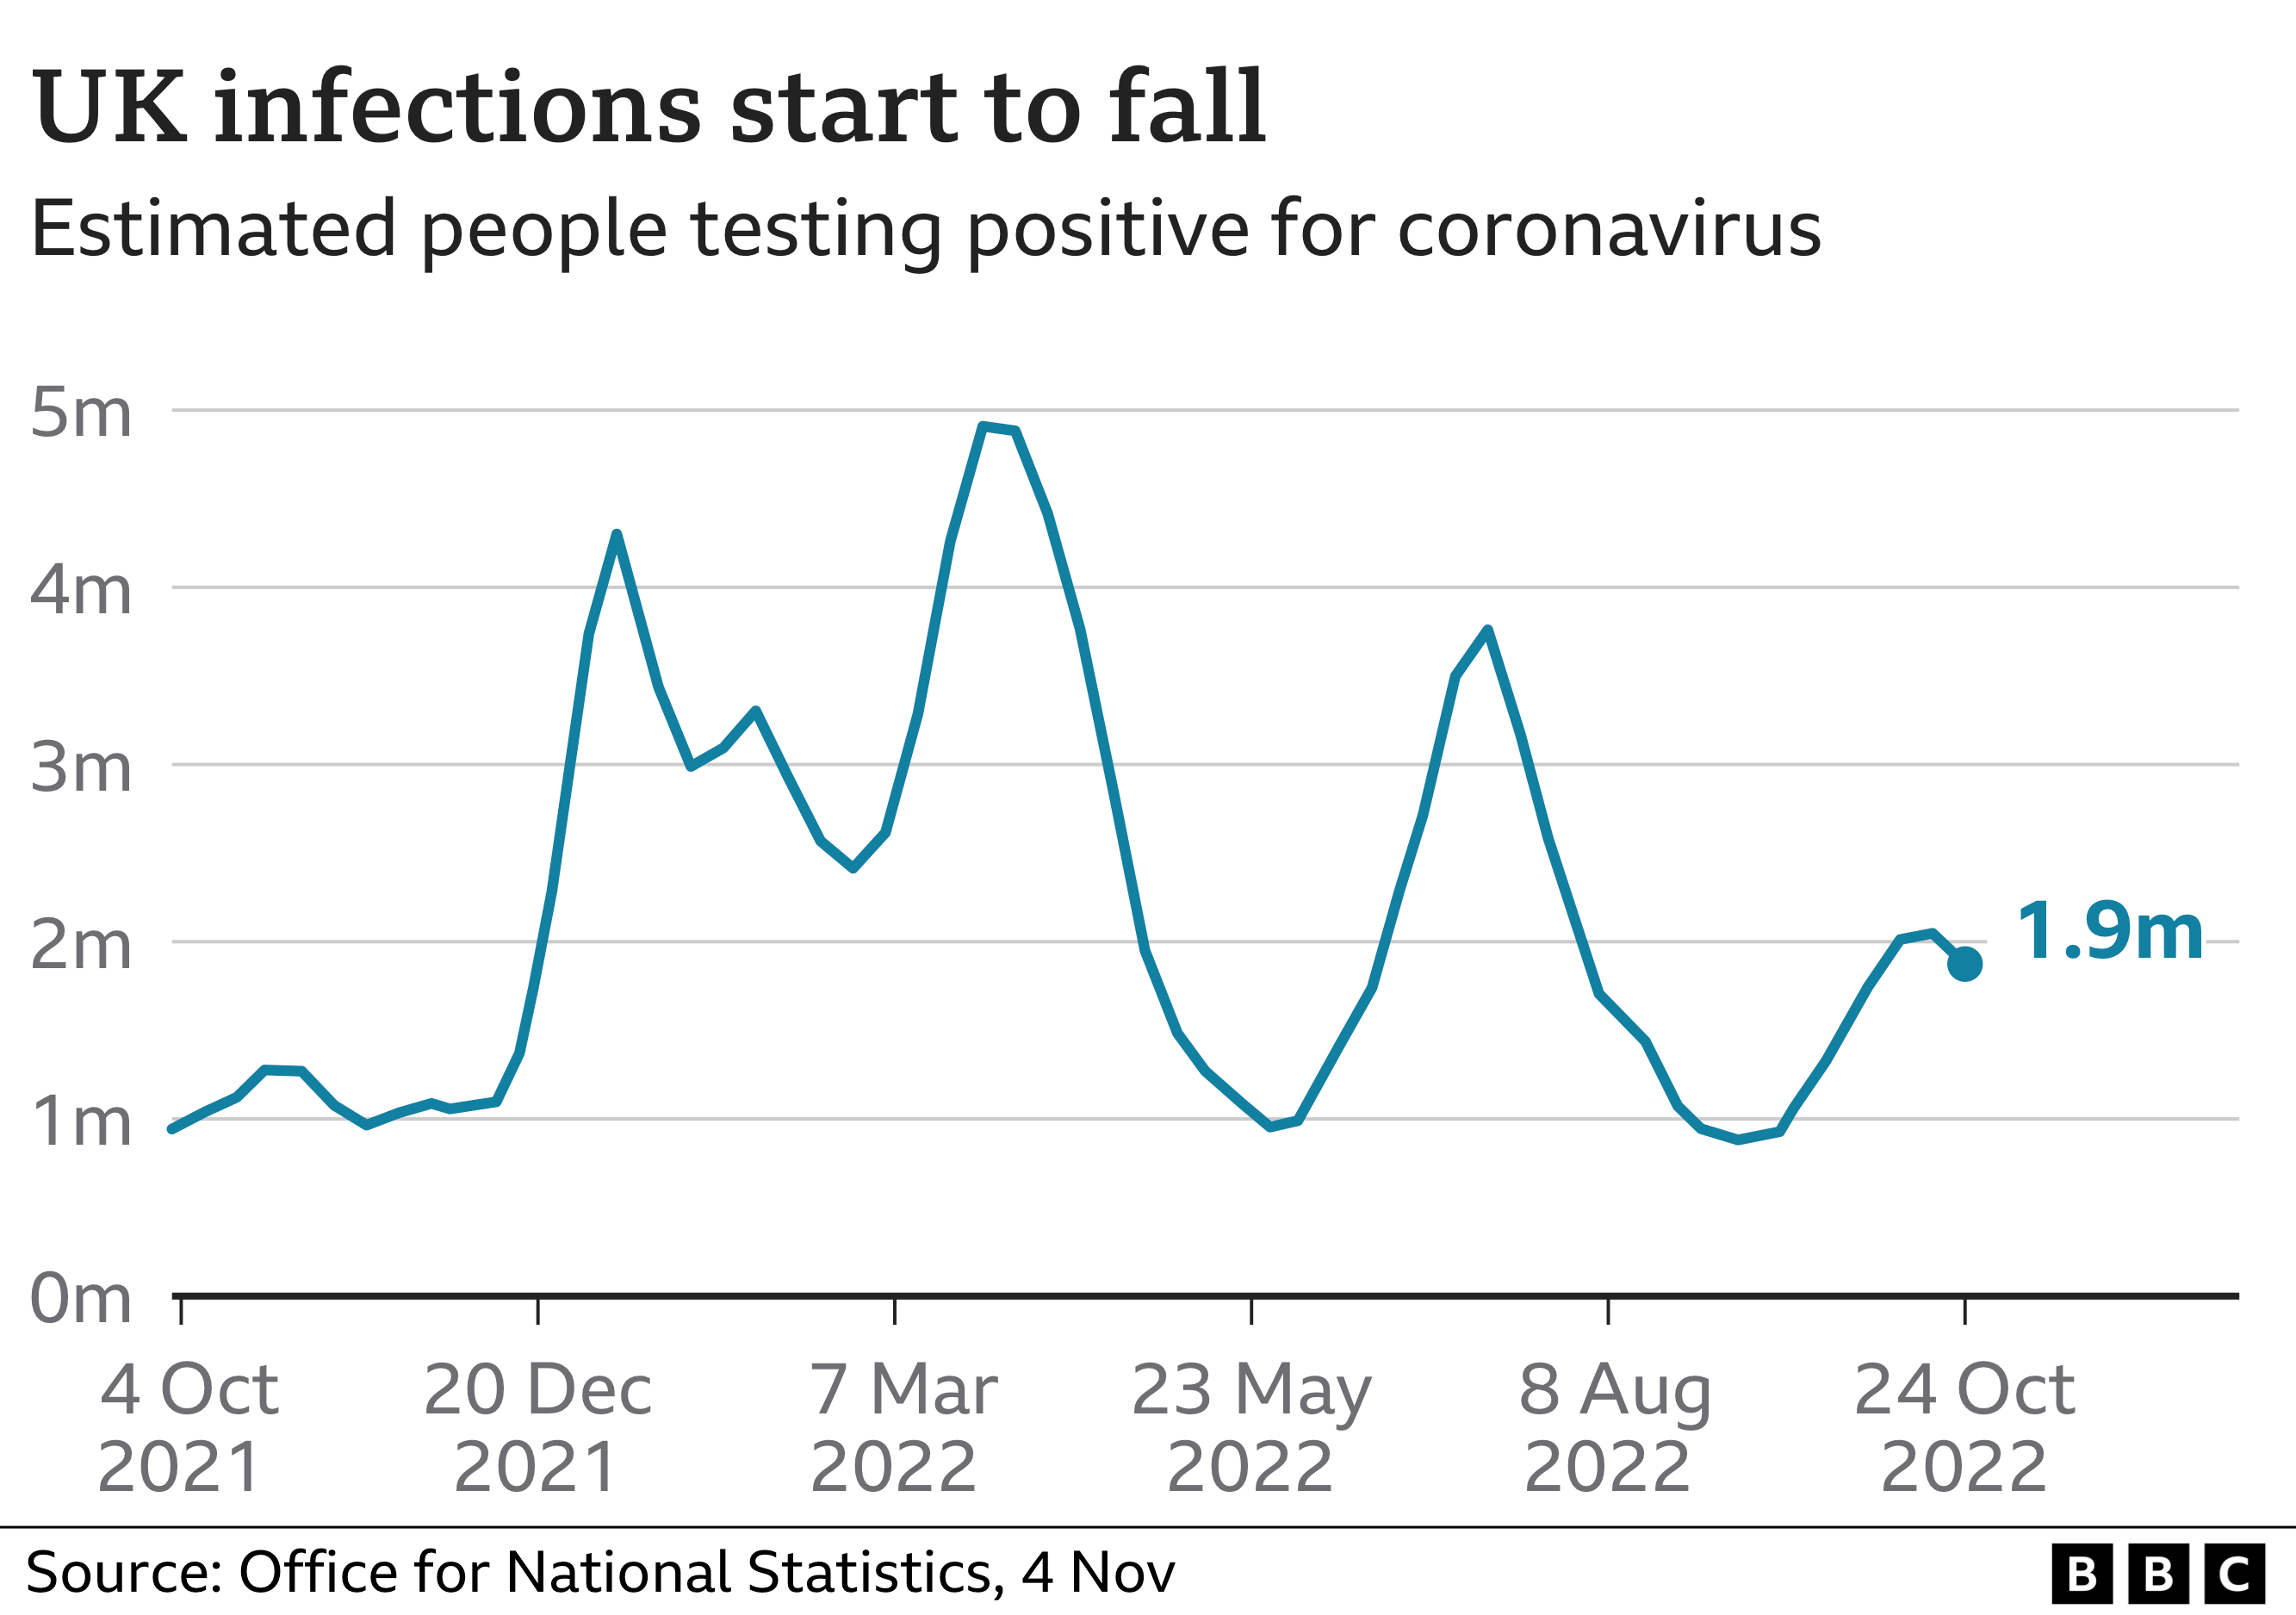 Graph of covid infections in the UK, showing a decrease in the past week ending 24 October 2022 to 1.9m. The latest value is lower than peaks in summer 2022, March 2022 and December 2021